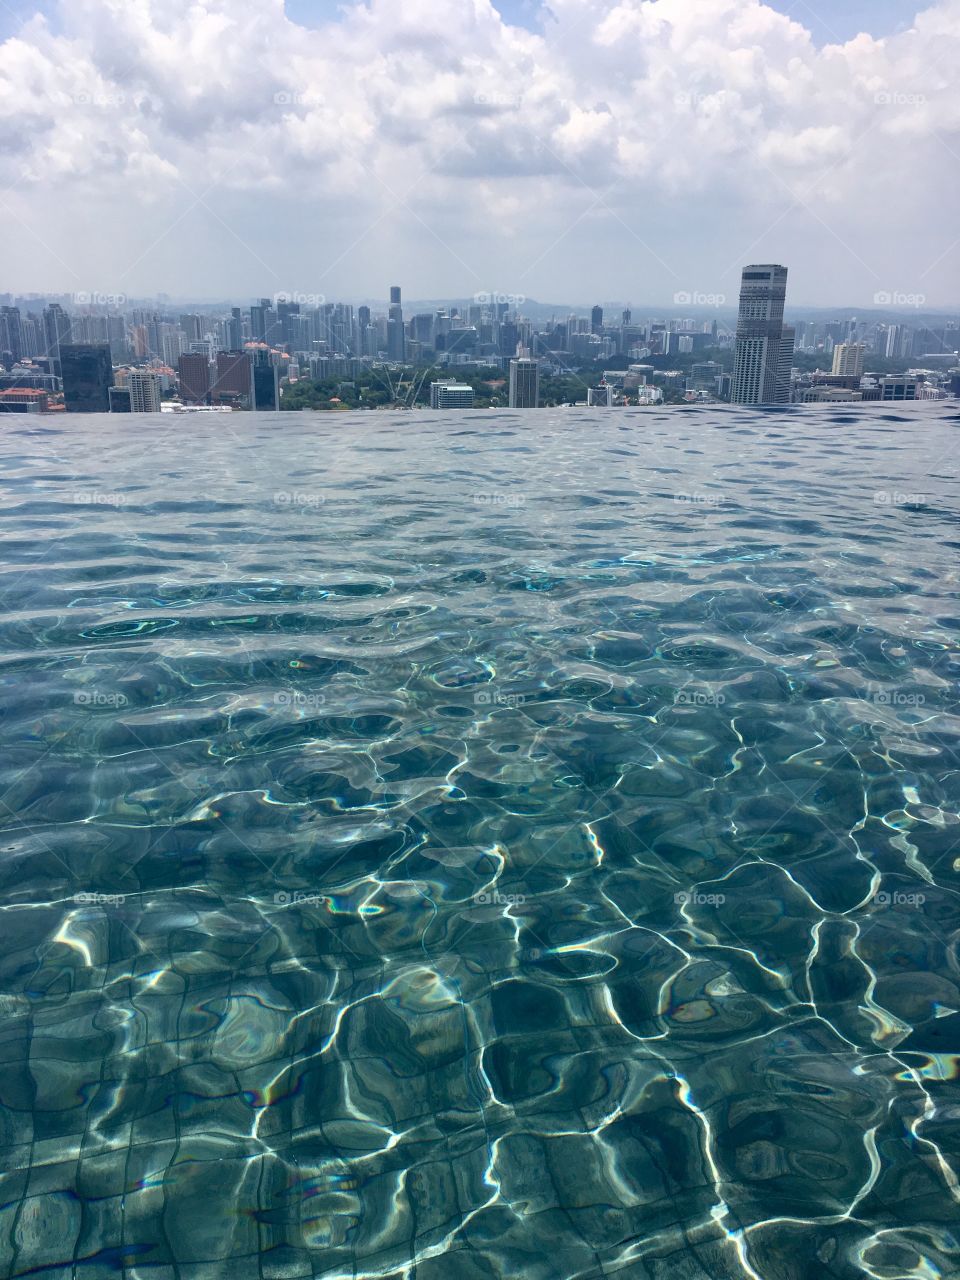 An amazing vue from the highest swimmingpool in the world - Marina Bay Sand Singapore